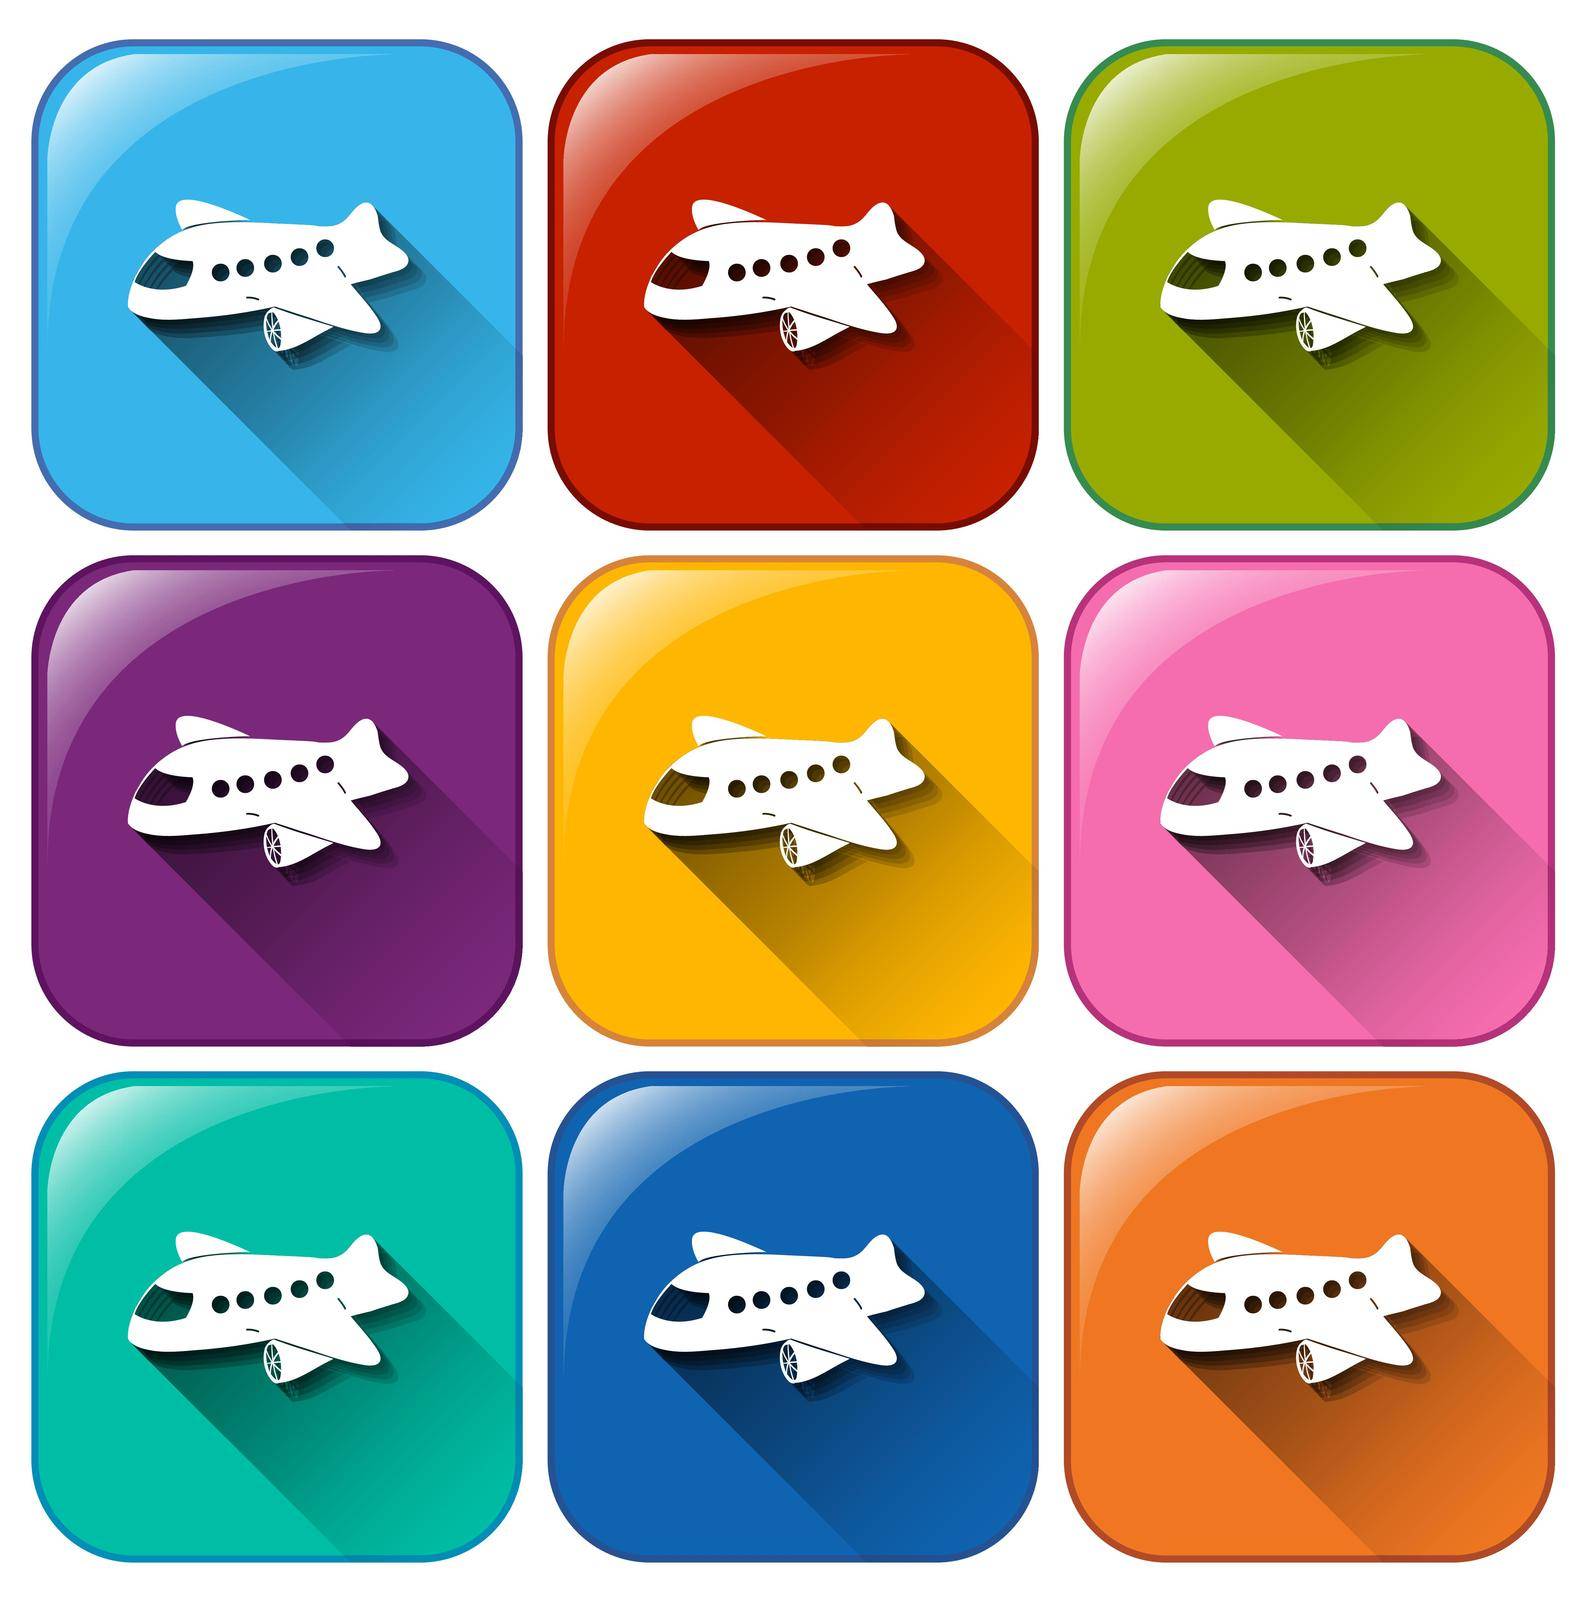 Buttons with planes on a white background